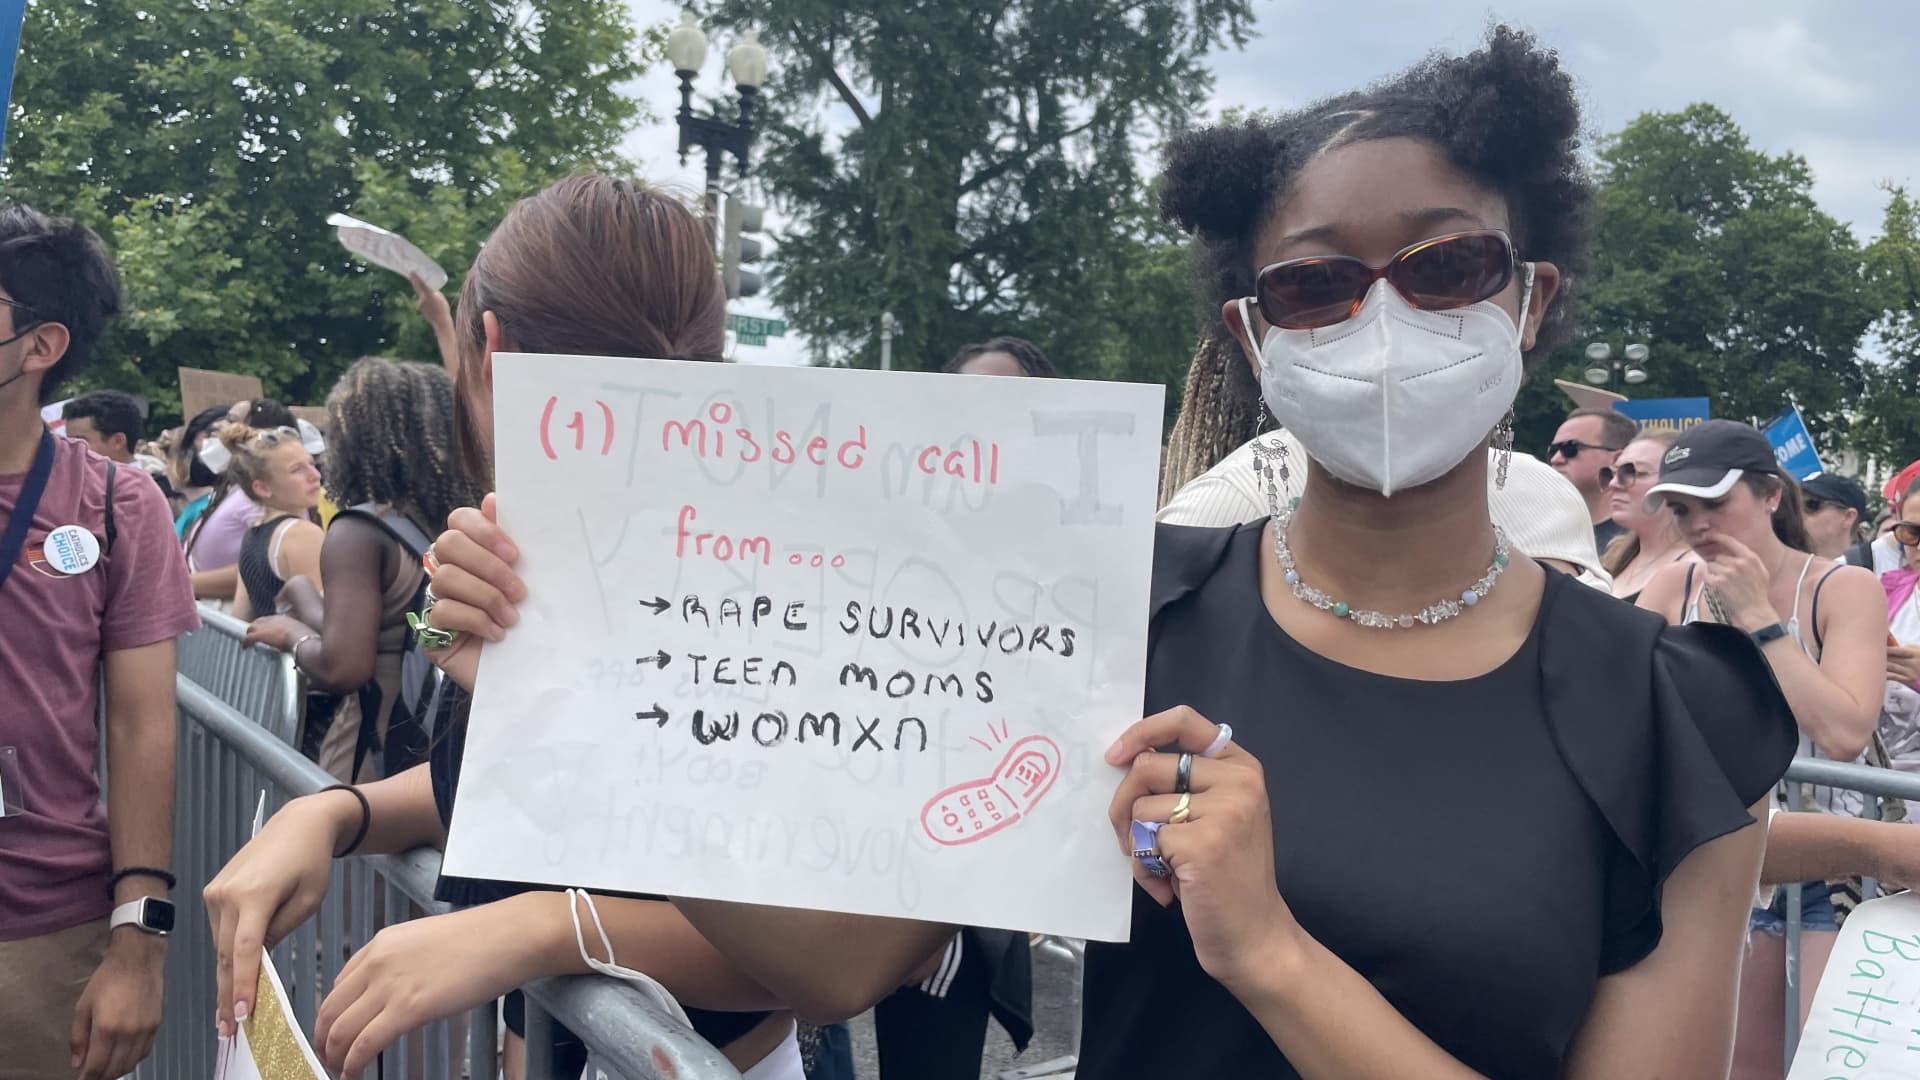 Noelle Gonzales Jackson, 15, holds a sign she made with her eyeliner during a protest outside of the Supreme Court building in Washington, D.C., on June 24, 2022.